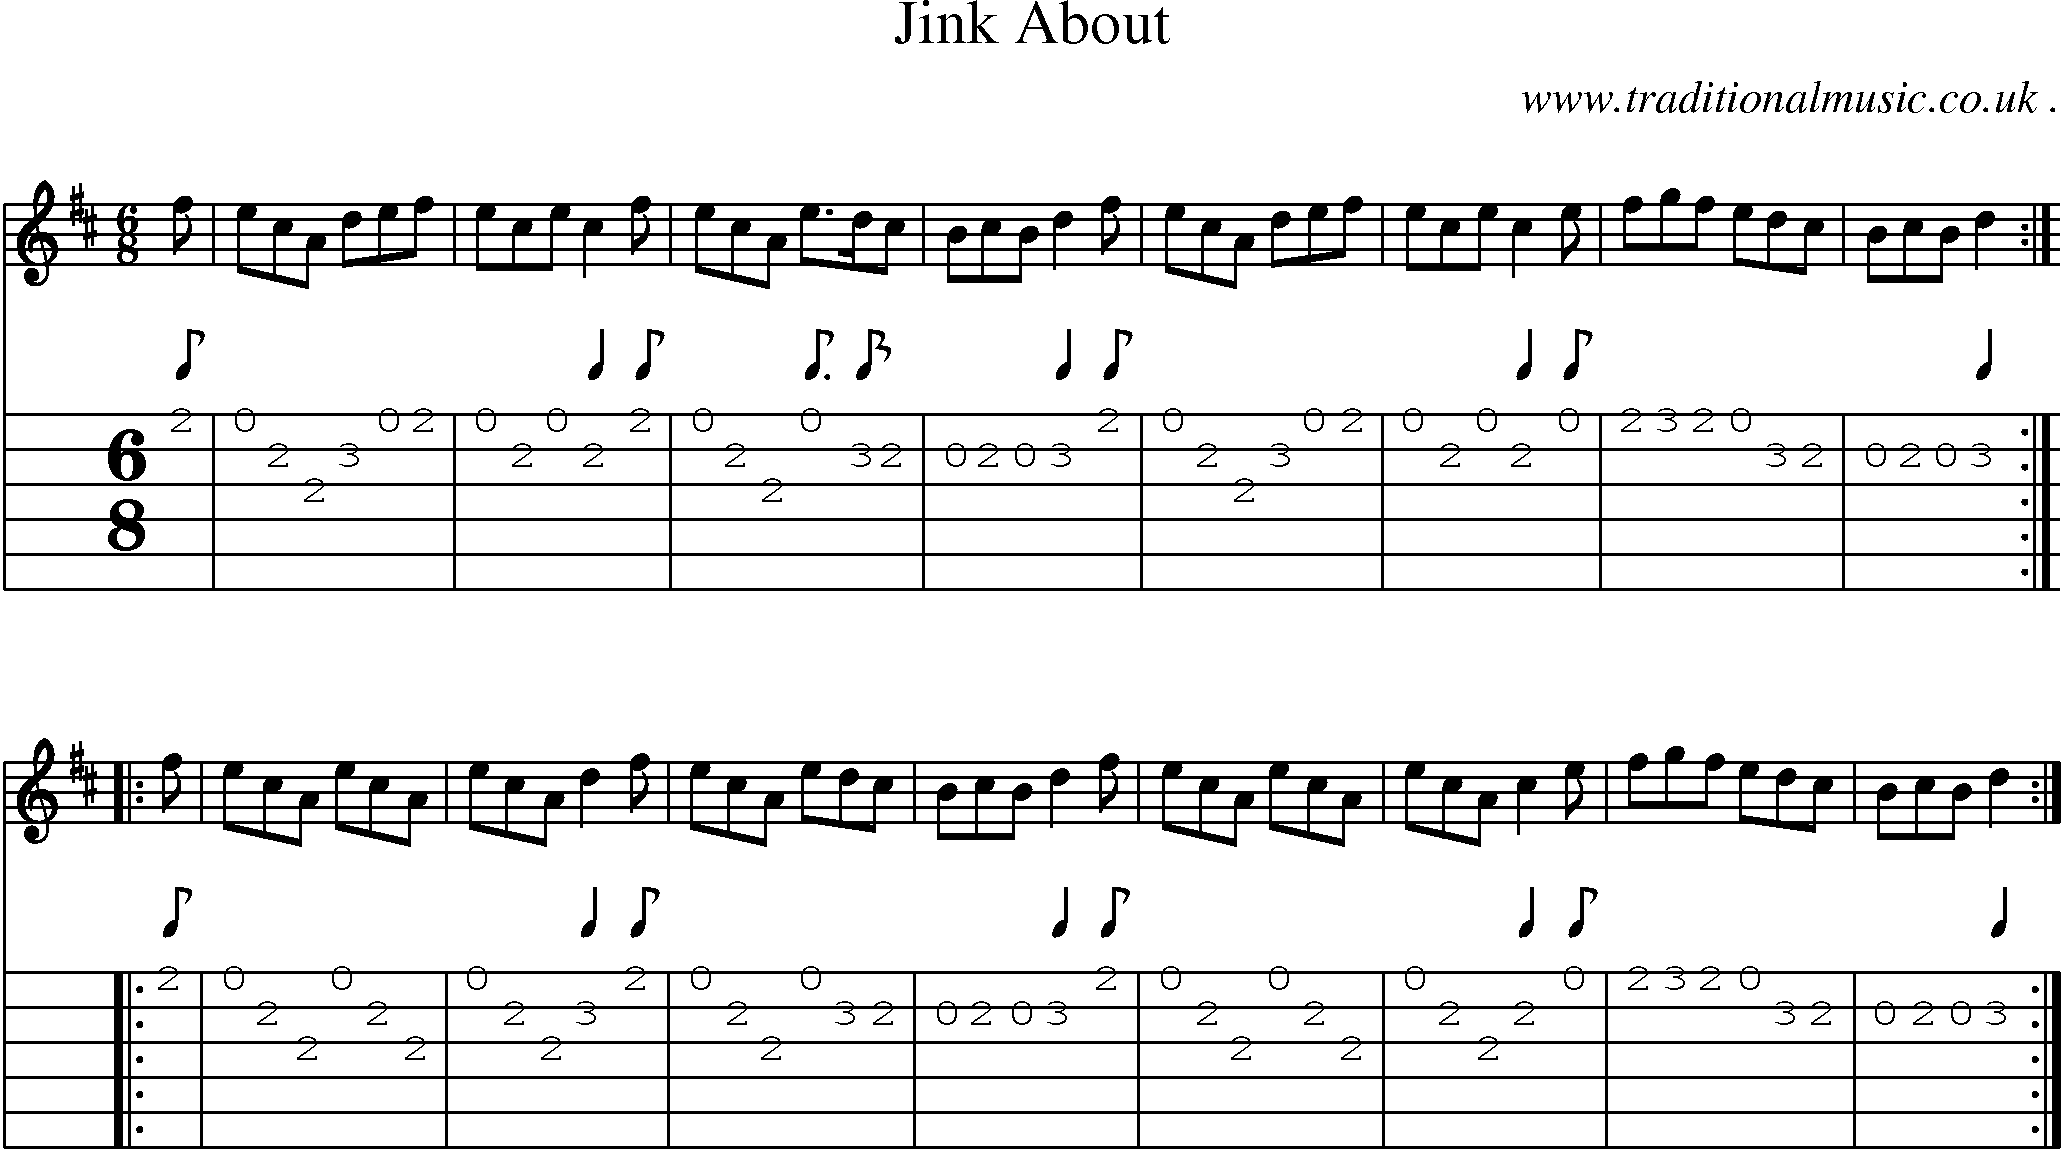 Sheet-Music and Guitar Tabs for Jink About